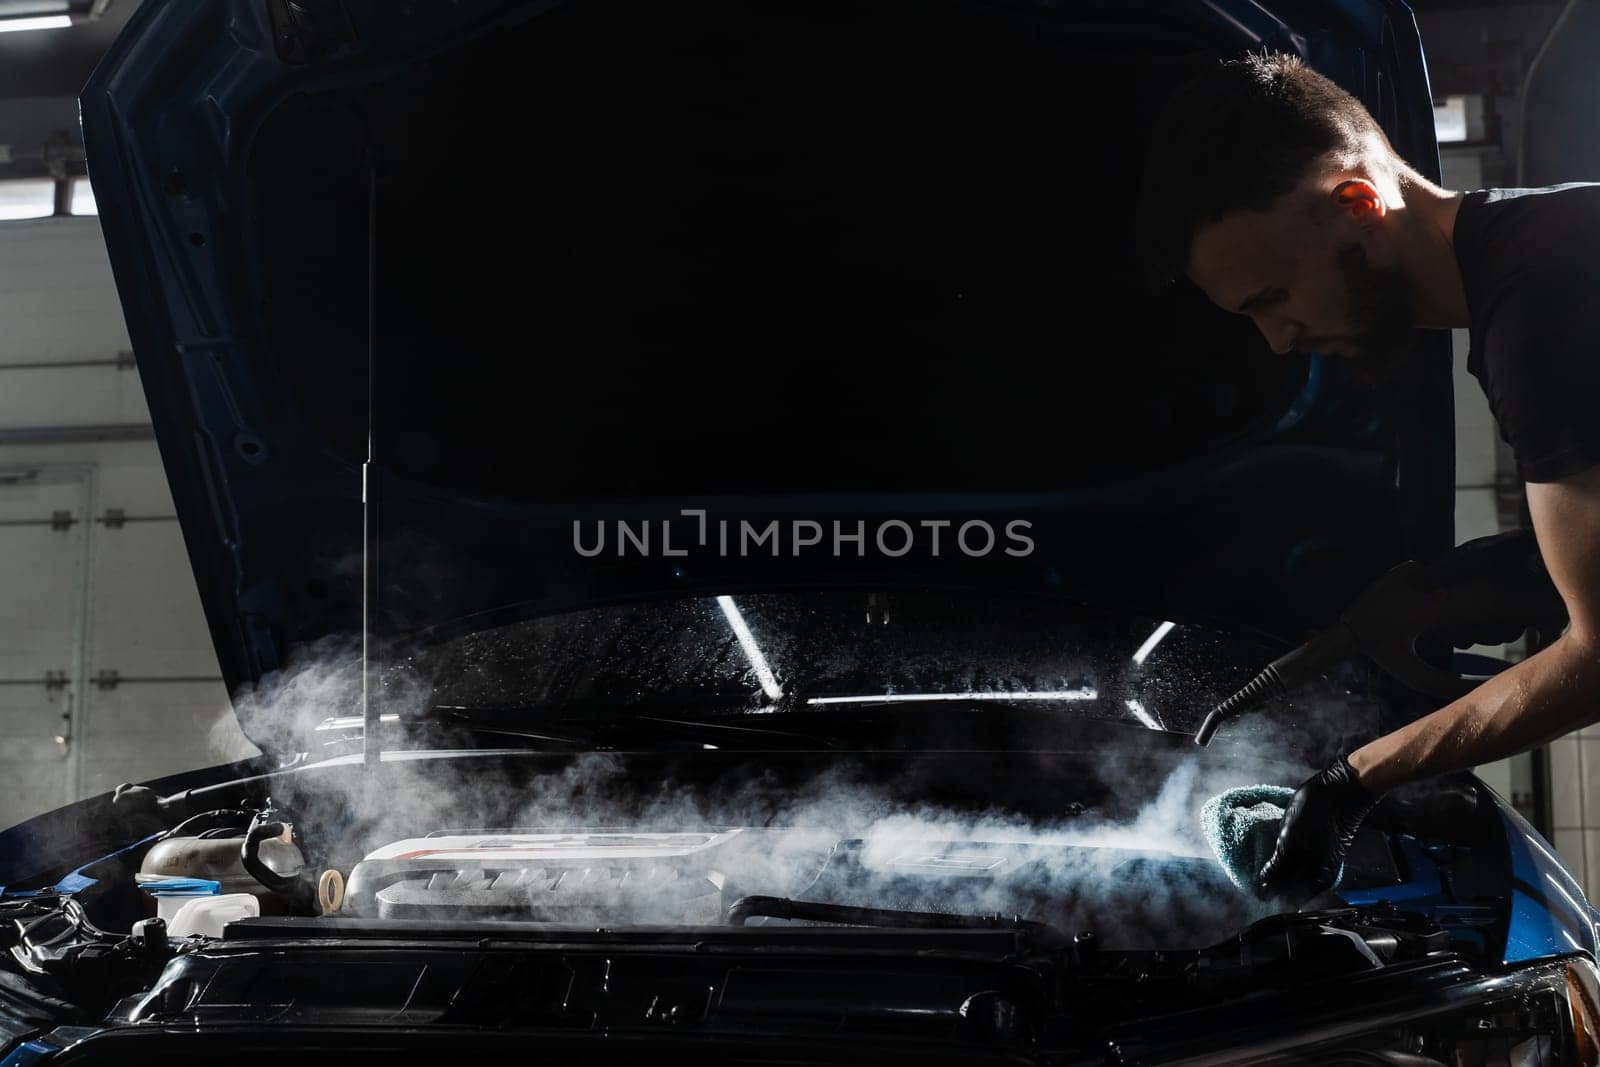 Steaming washing of motor of auto in detailing auto service. Process of steam cleaning car engine from dust and dirt